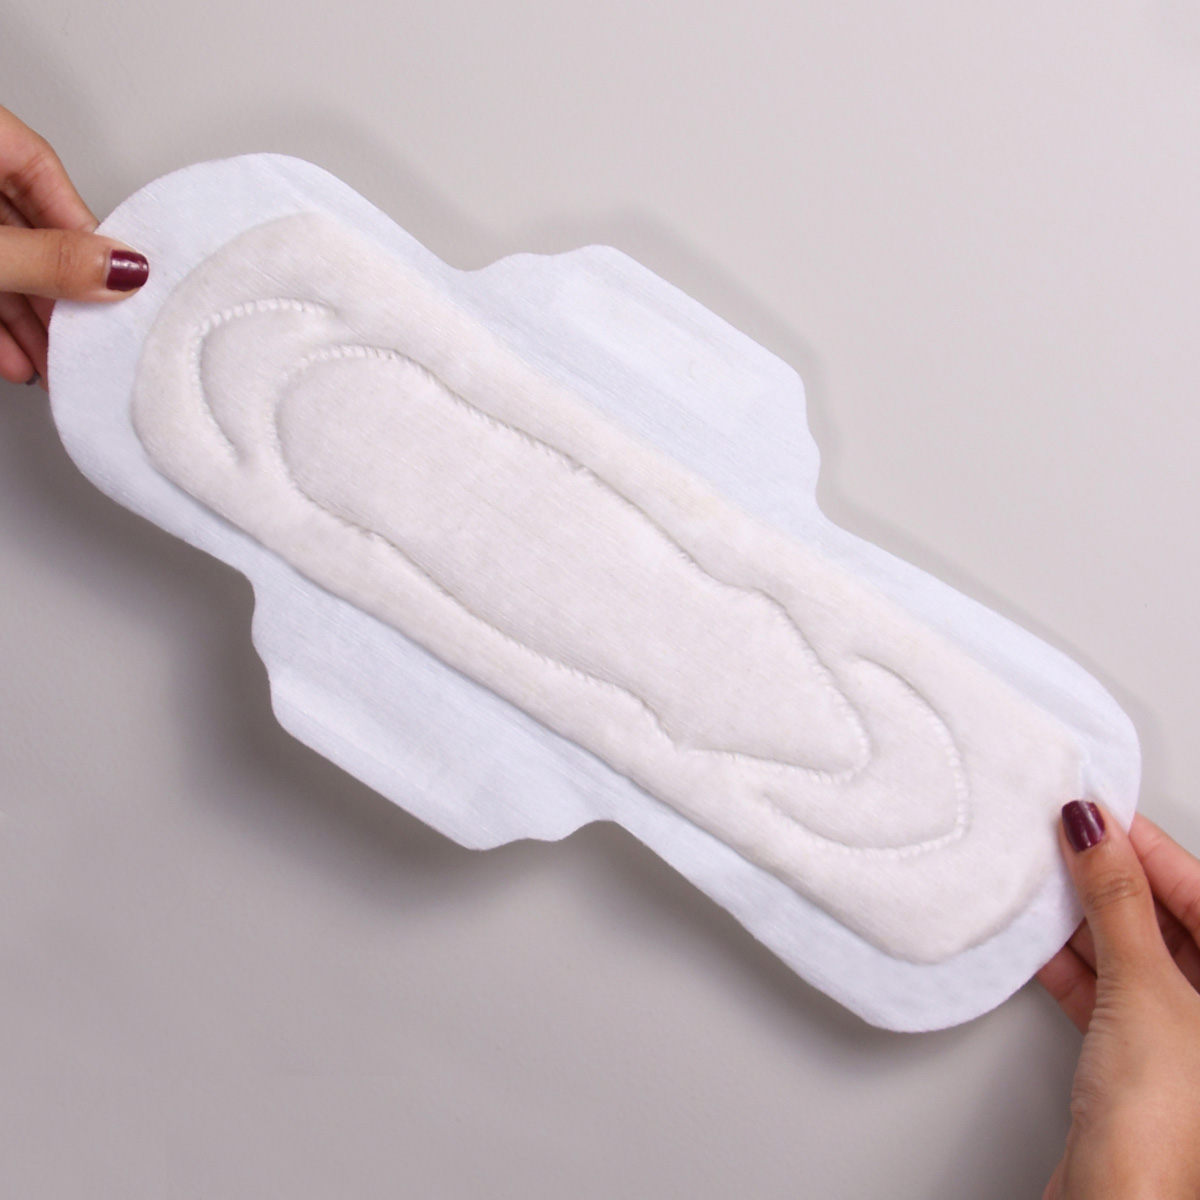 High amounts of harmful chemicals found in sanitary napkins